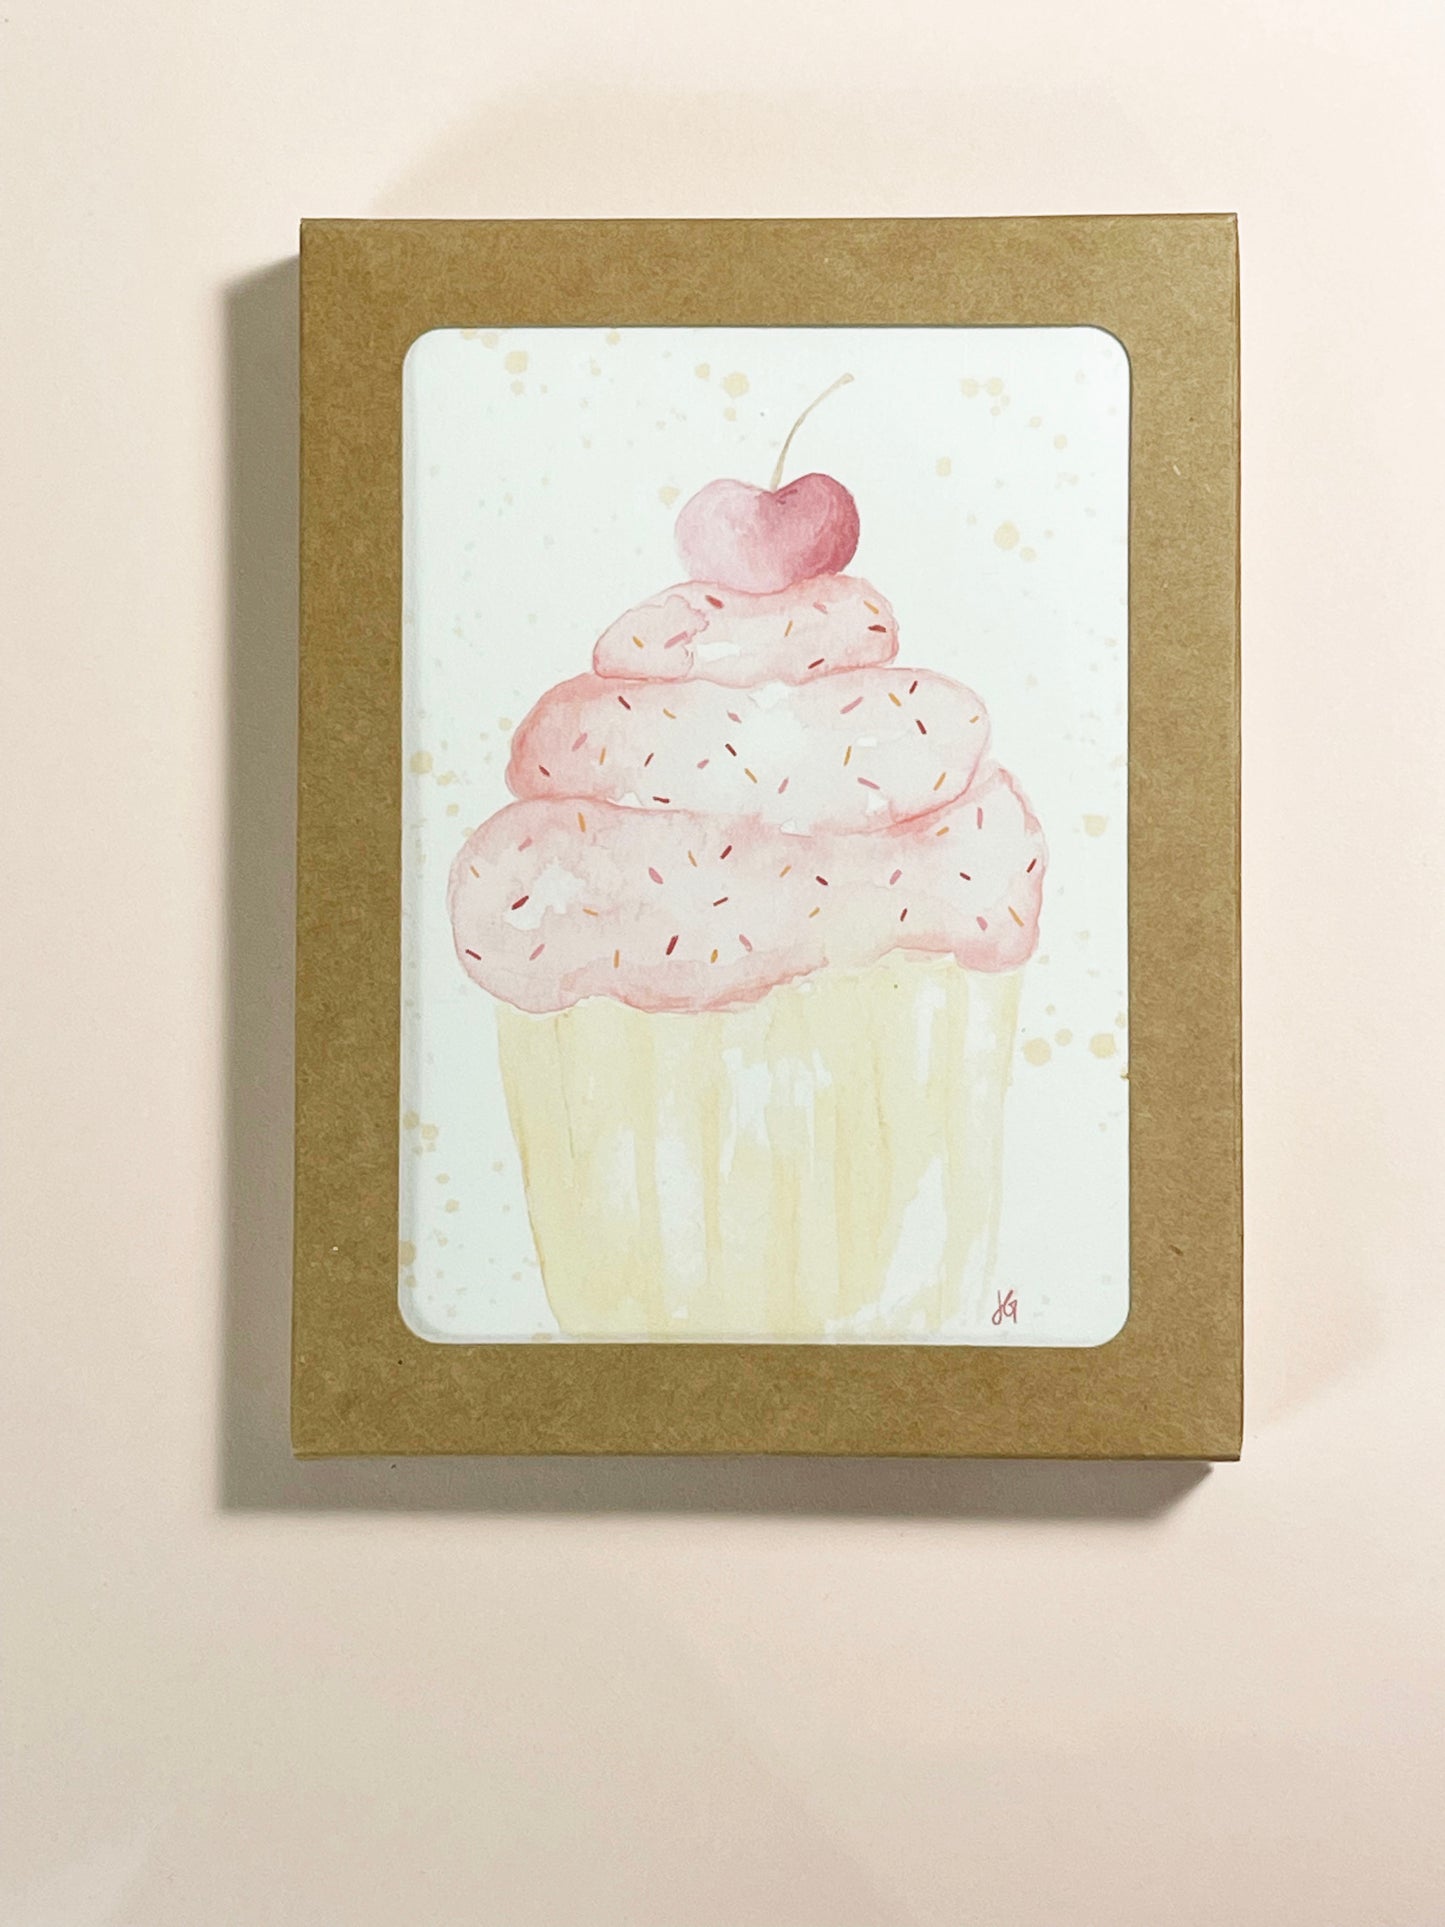 pink cupcake with a cherry on top, varying shades of pink and orange sprinkles, watercolor illustration greeting card, blank inside.  This is a boxed set a cards, 6 cards and 6 envelopes come to an order when its boxed.